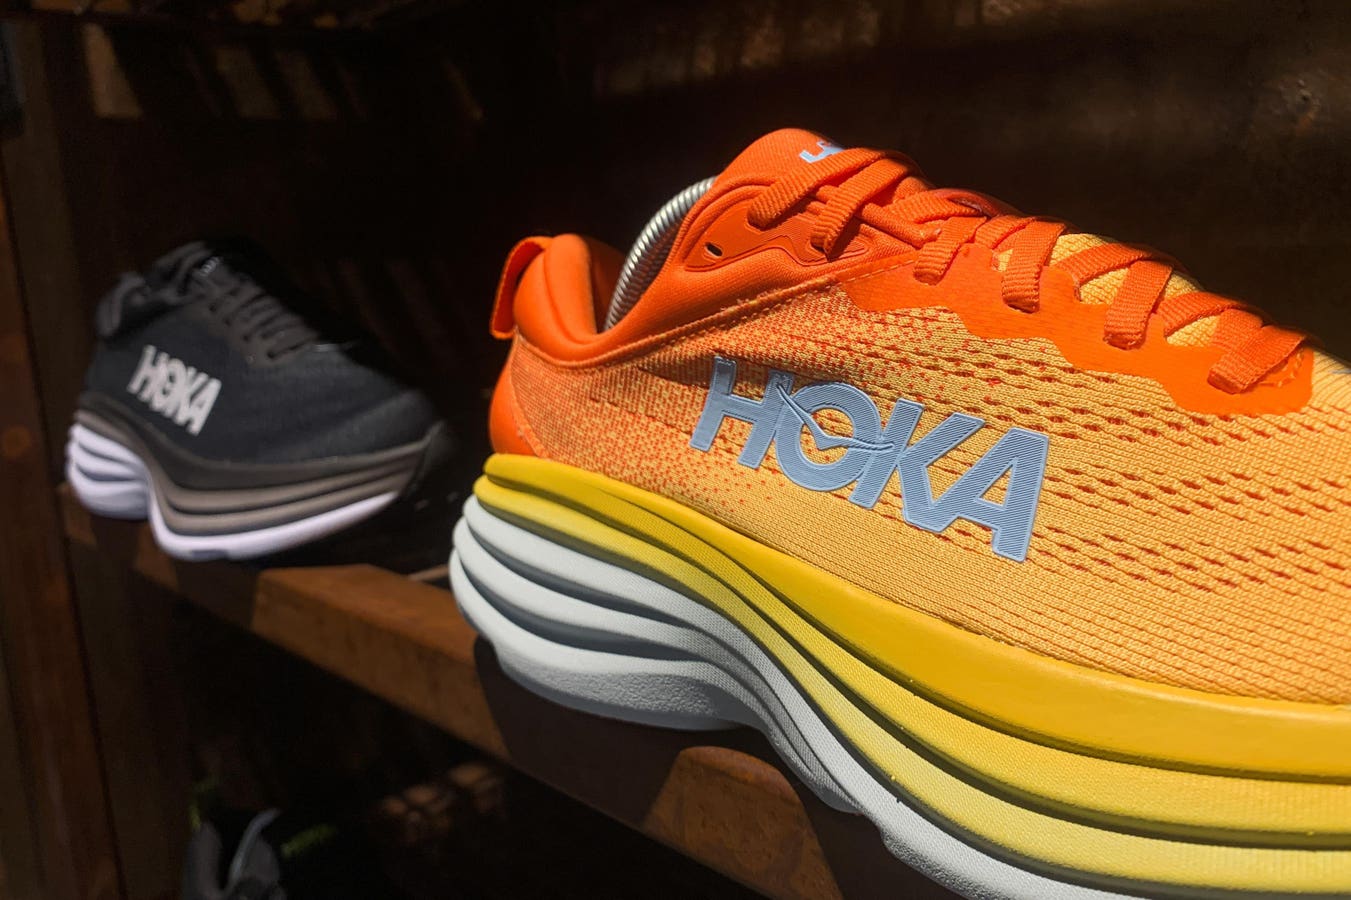 Deckers Powers 22% Ahead With Hoka Leading The Charge And Ugg A Strong Supporting Player